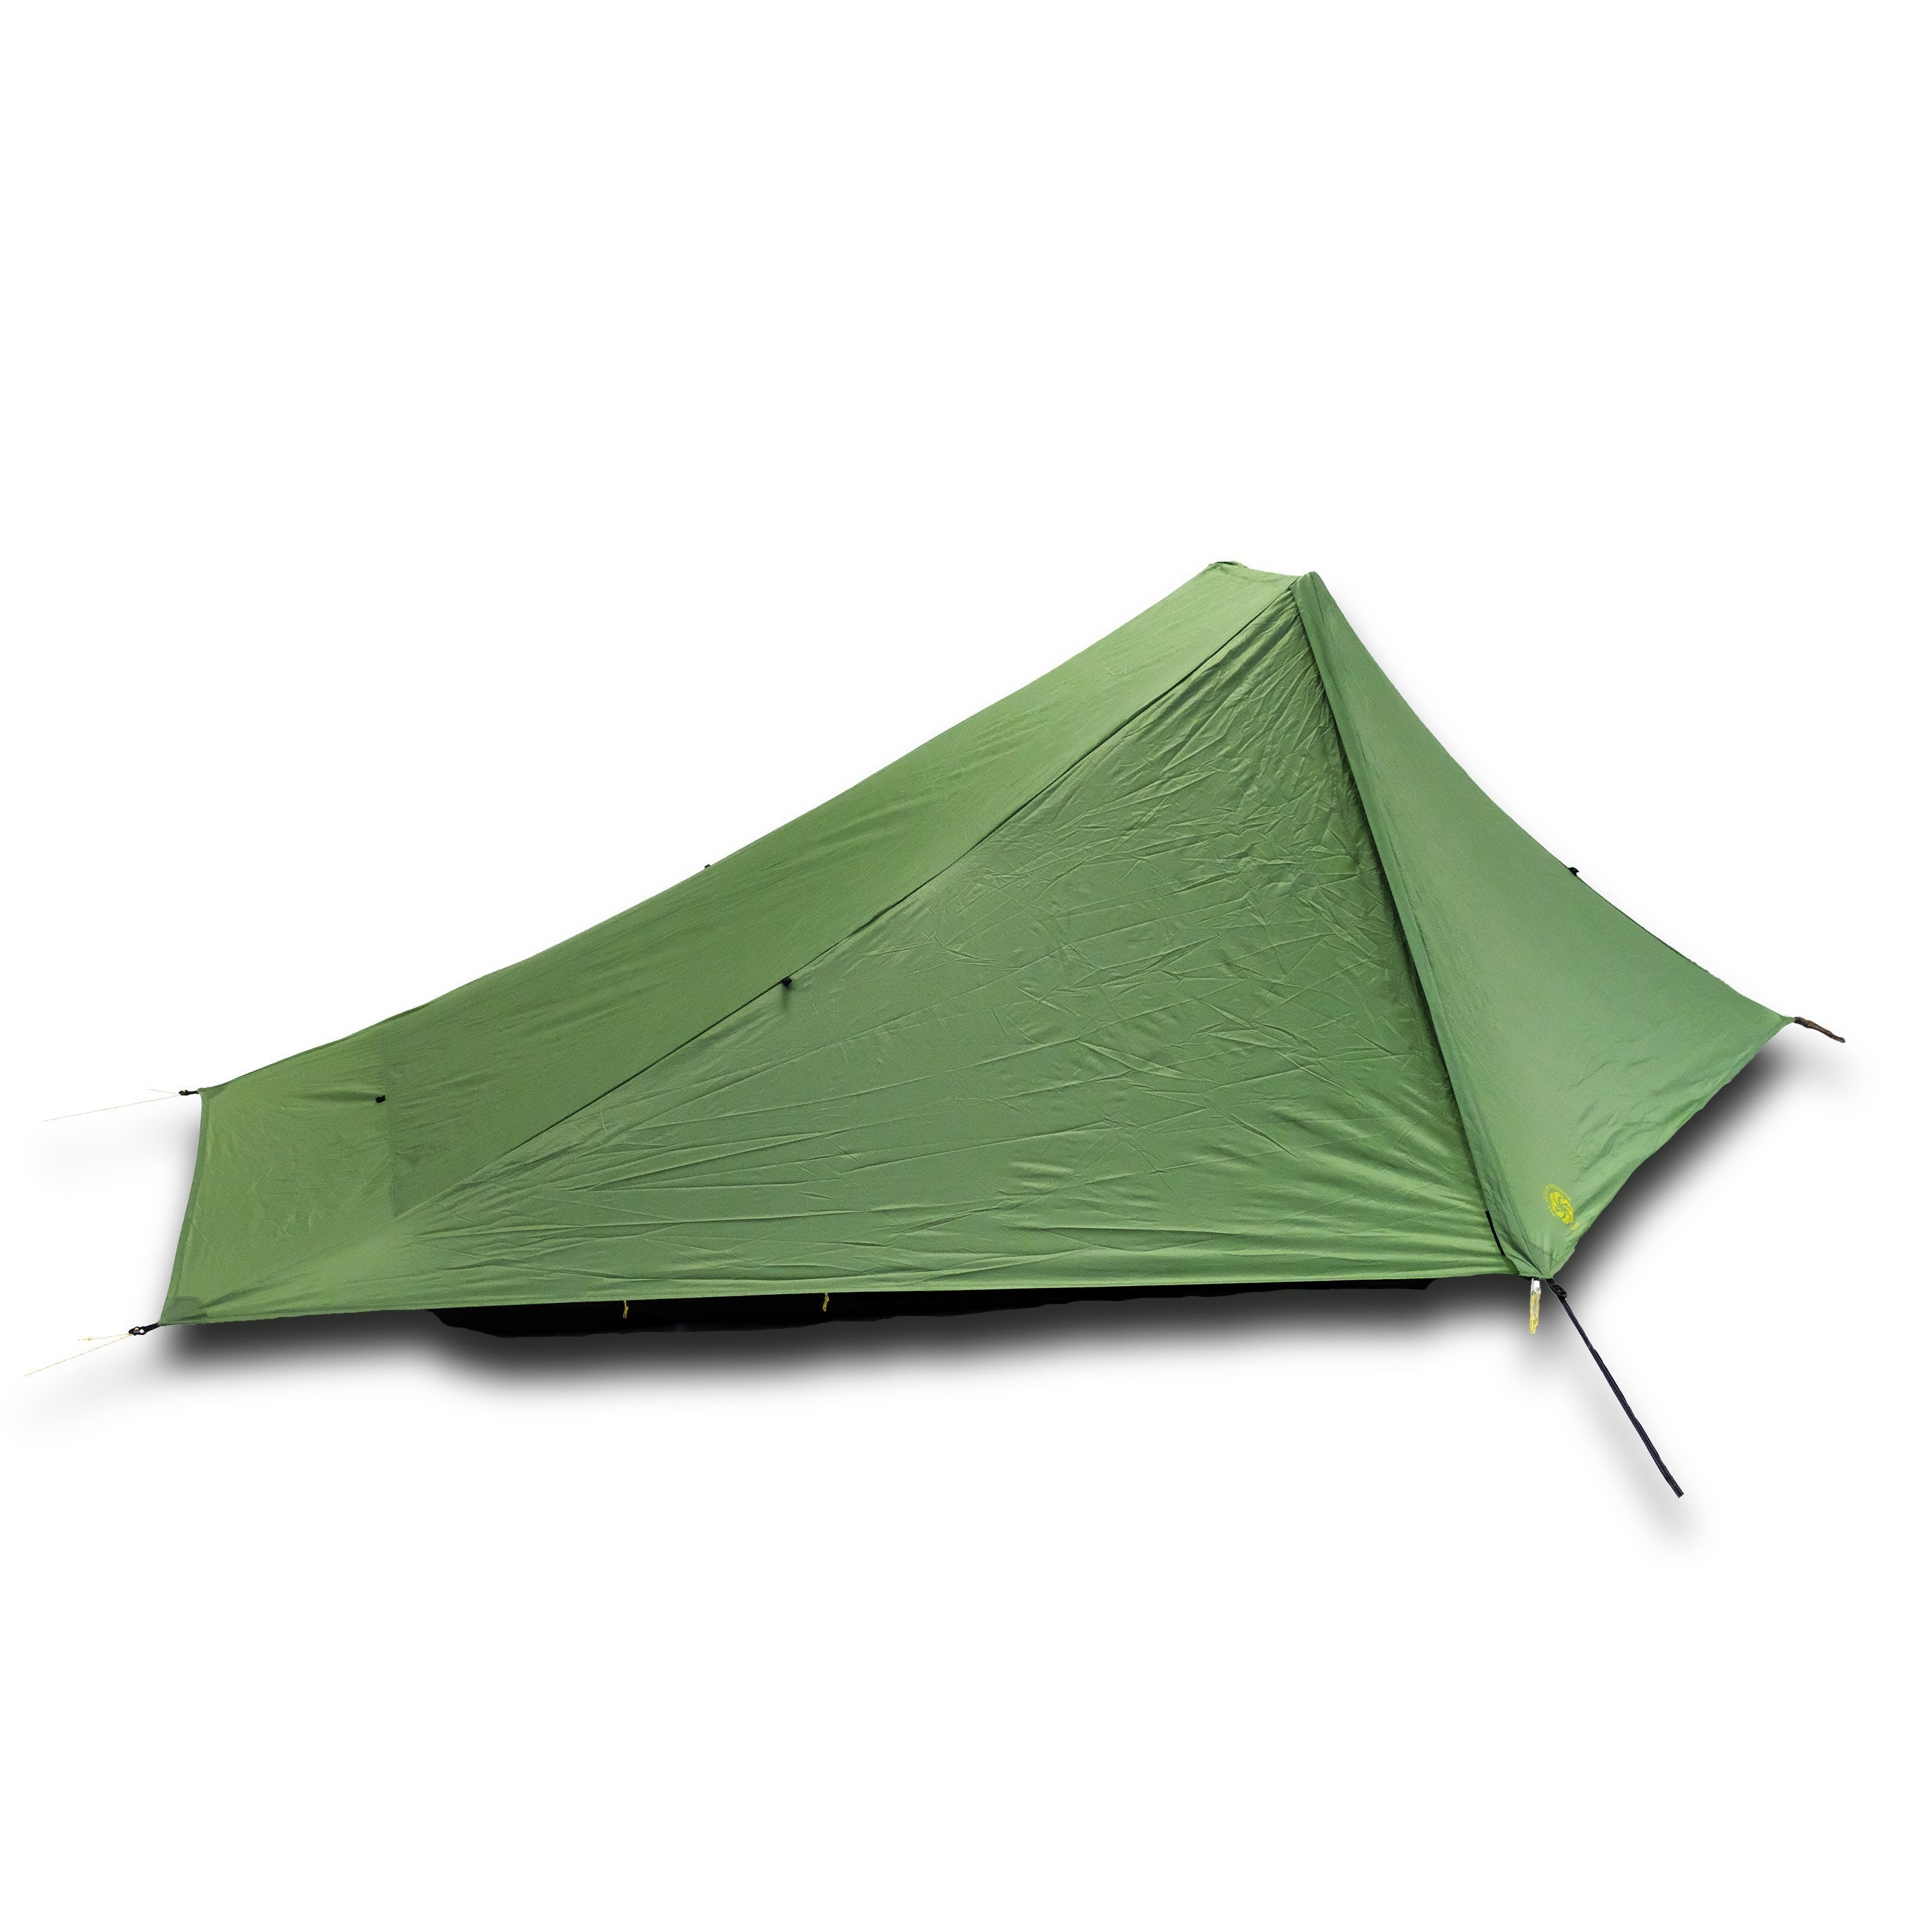 Skyscape Scout Ultralight 1 Person Tent with doors closed - Rear corner